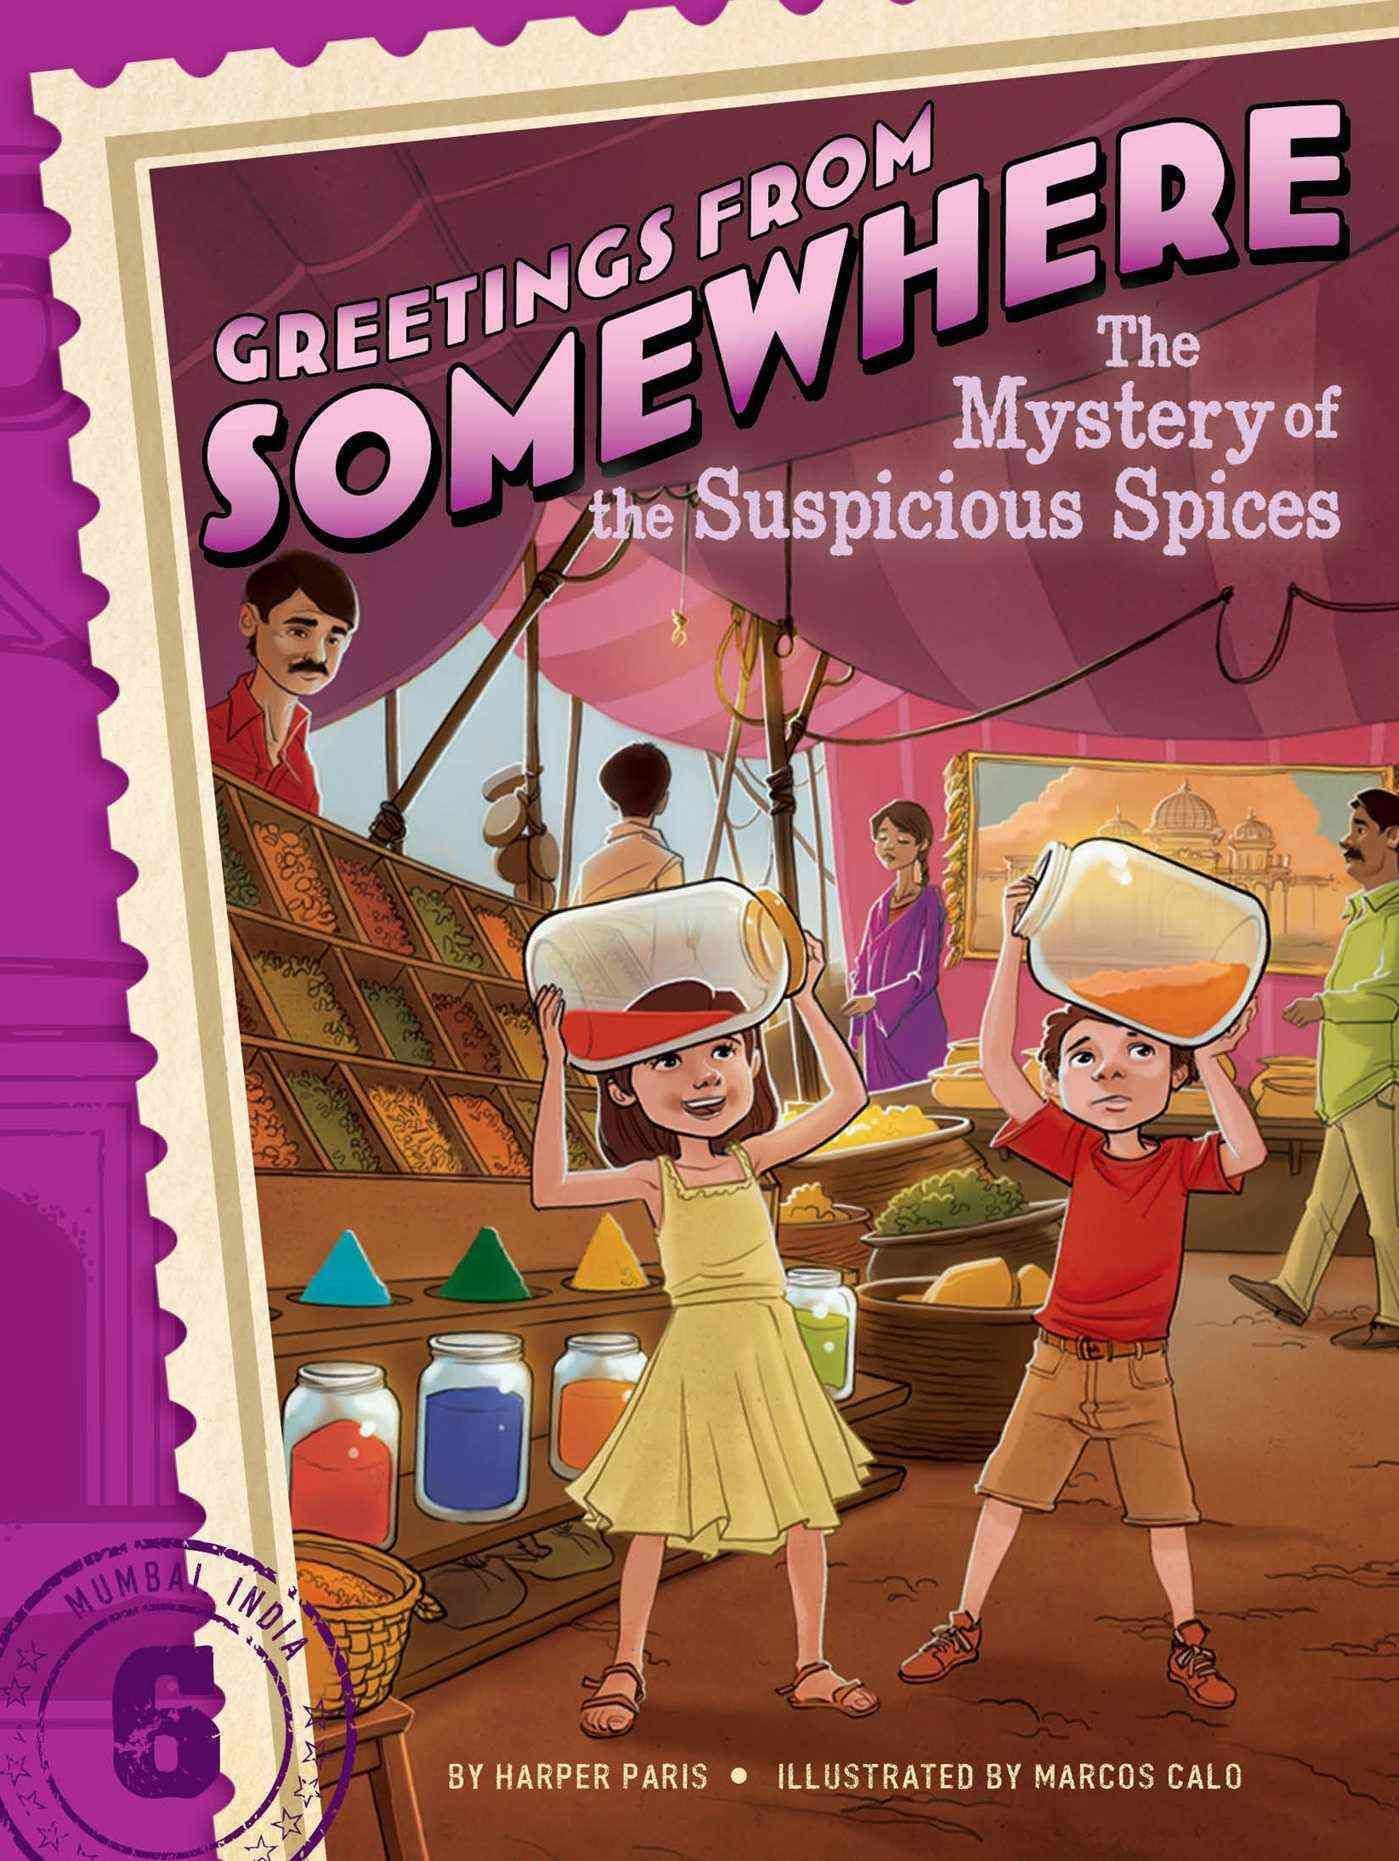 The Mystery of the Suspicious Spices